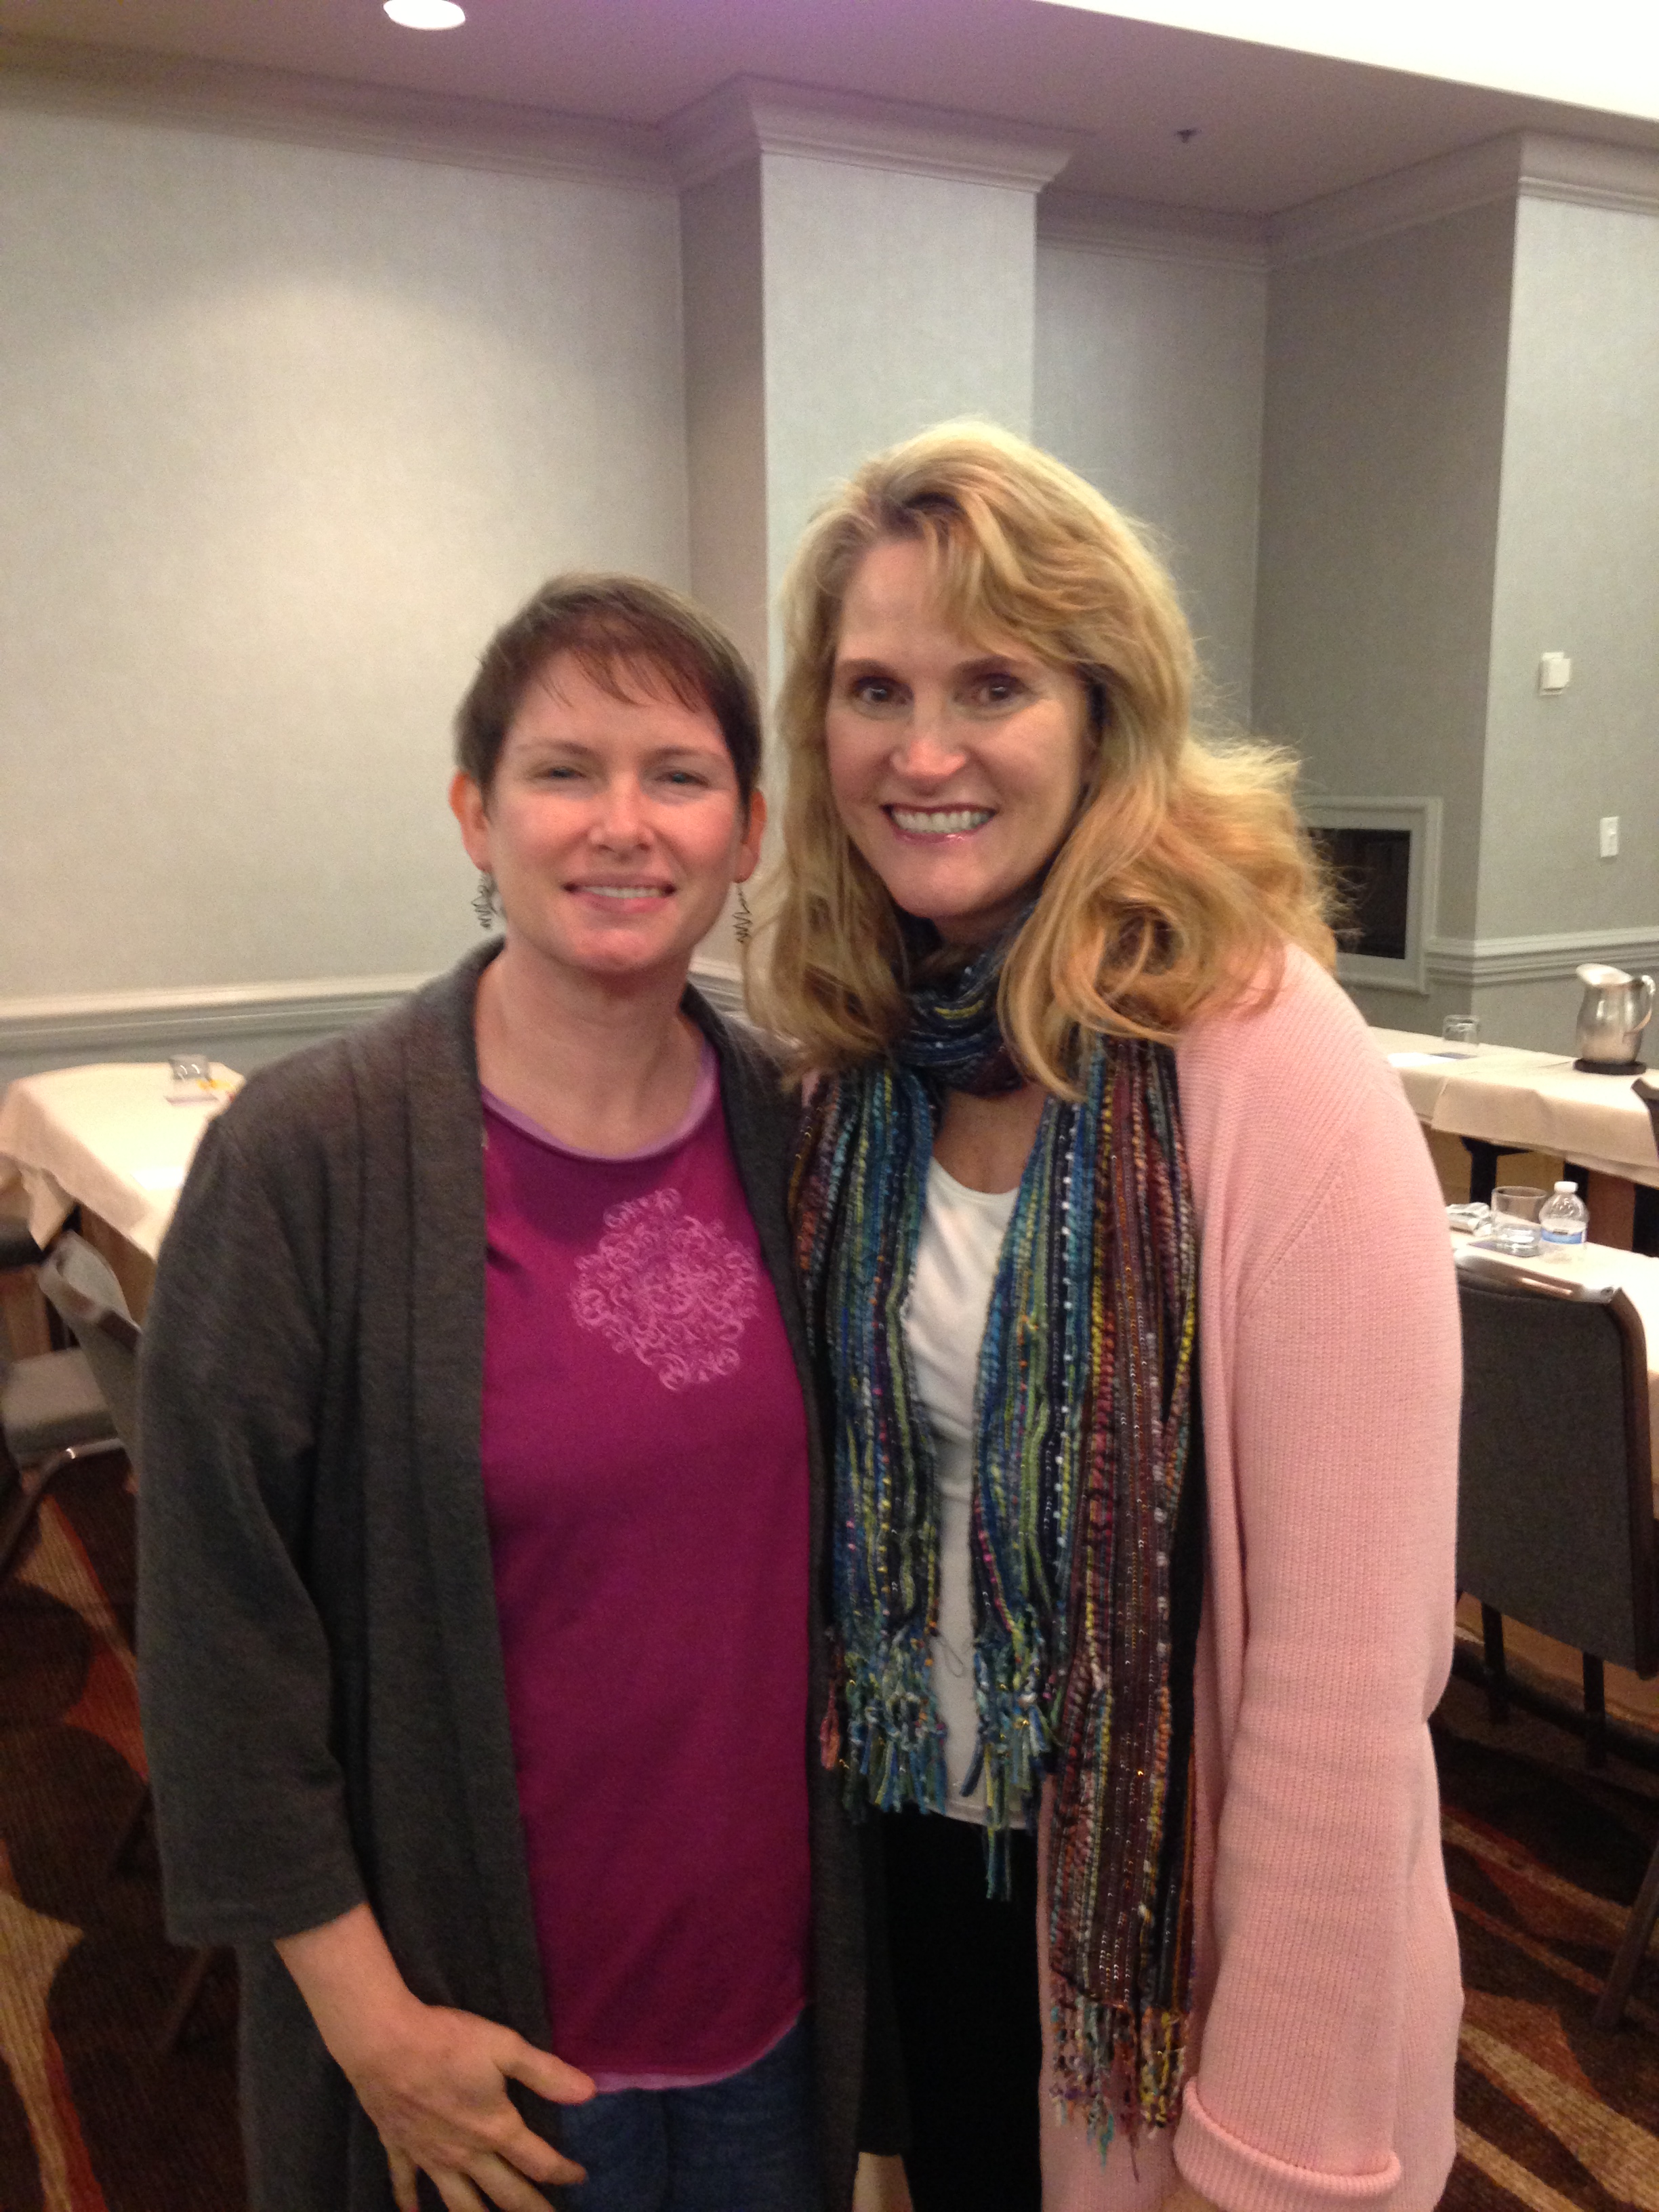 Sharon with Susan Salvo at the 2014 AMTA-AL Spring Convention